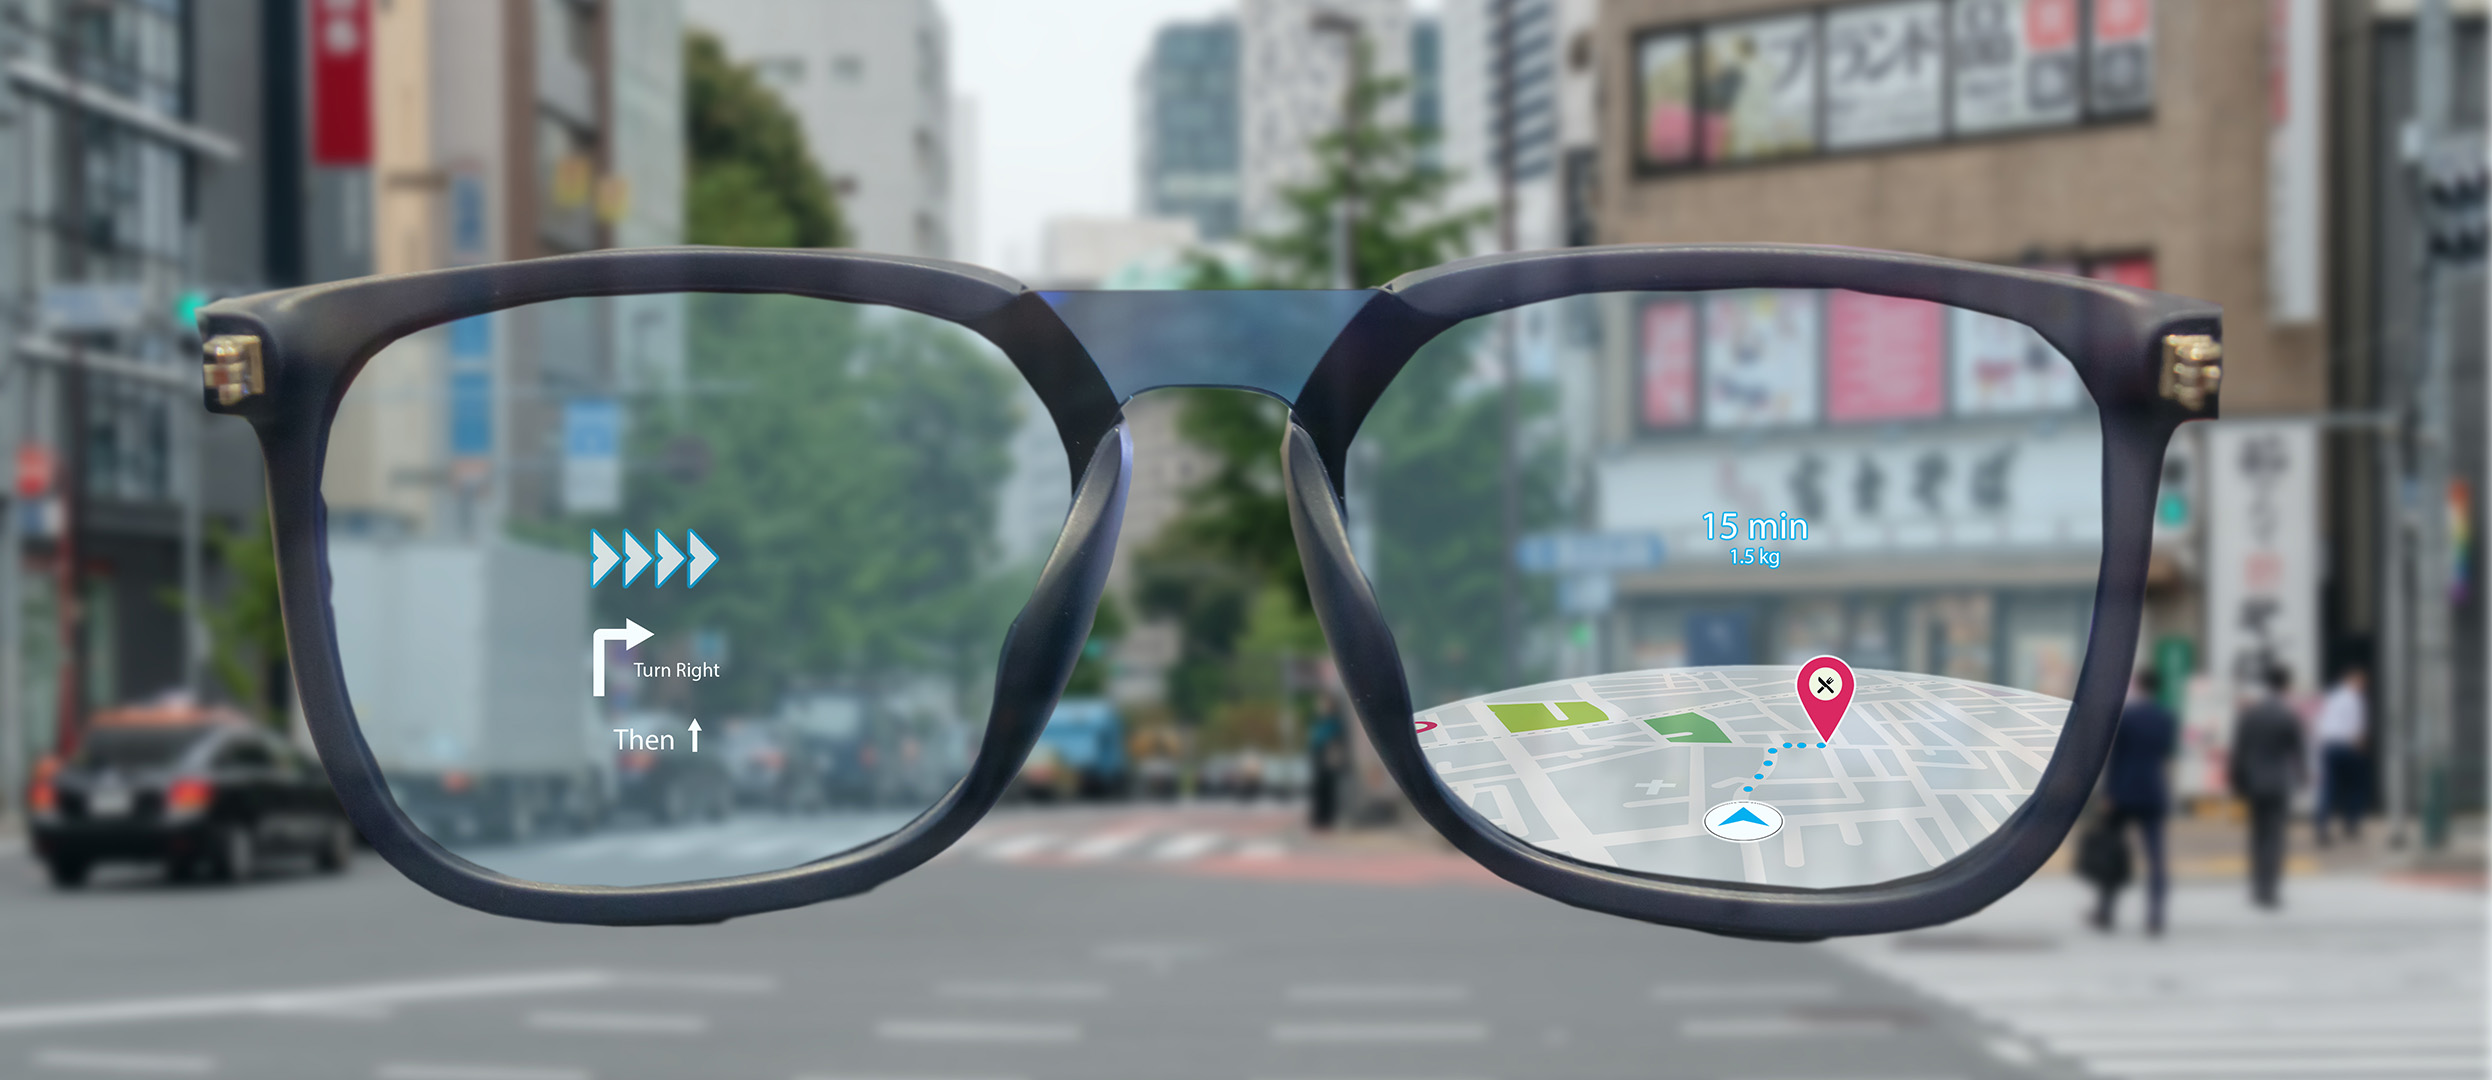 augmented reality glasses with smart navigation - What will replace smartphones in 5 years